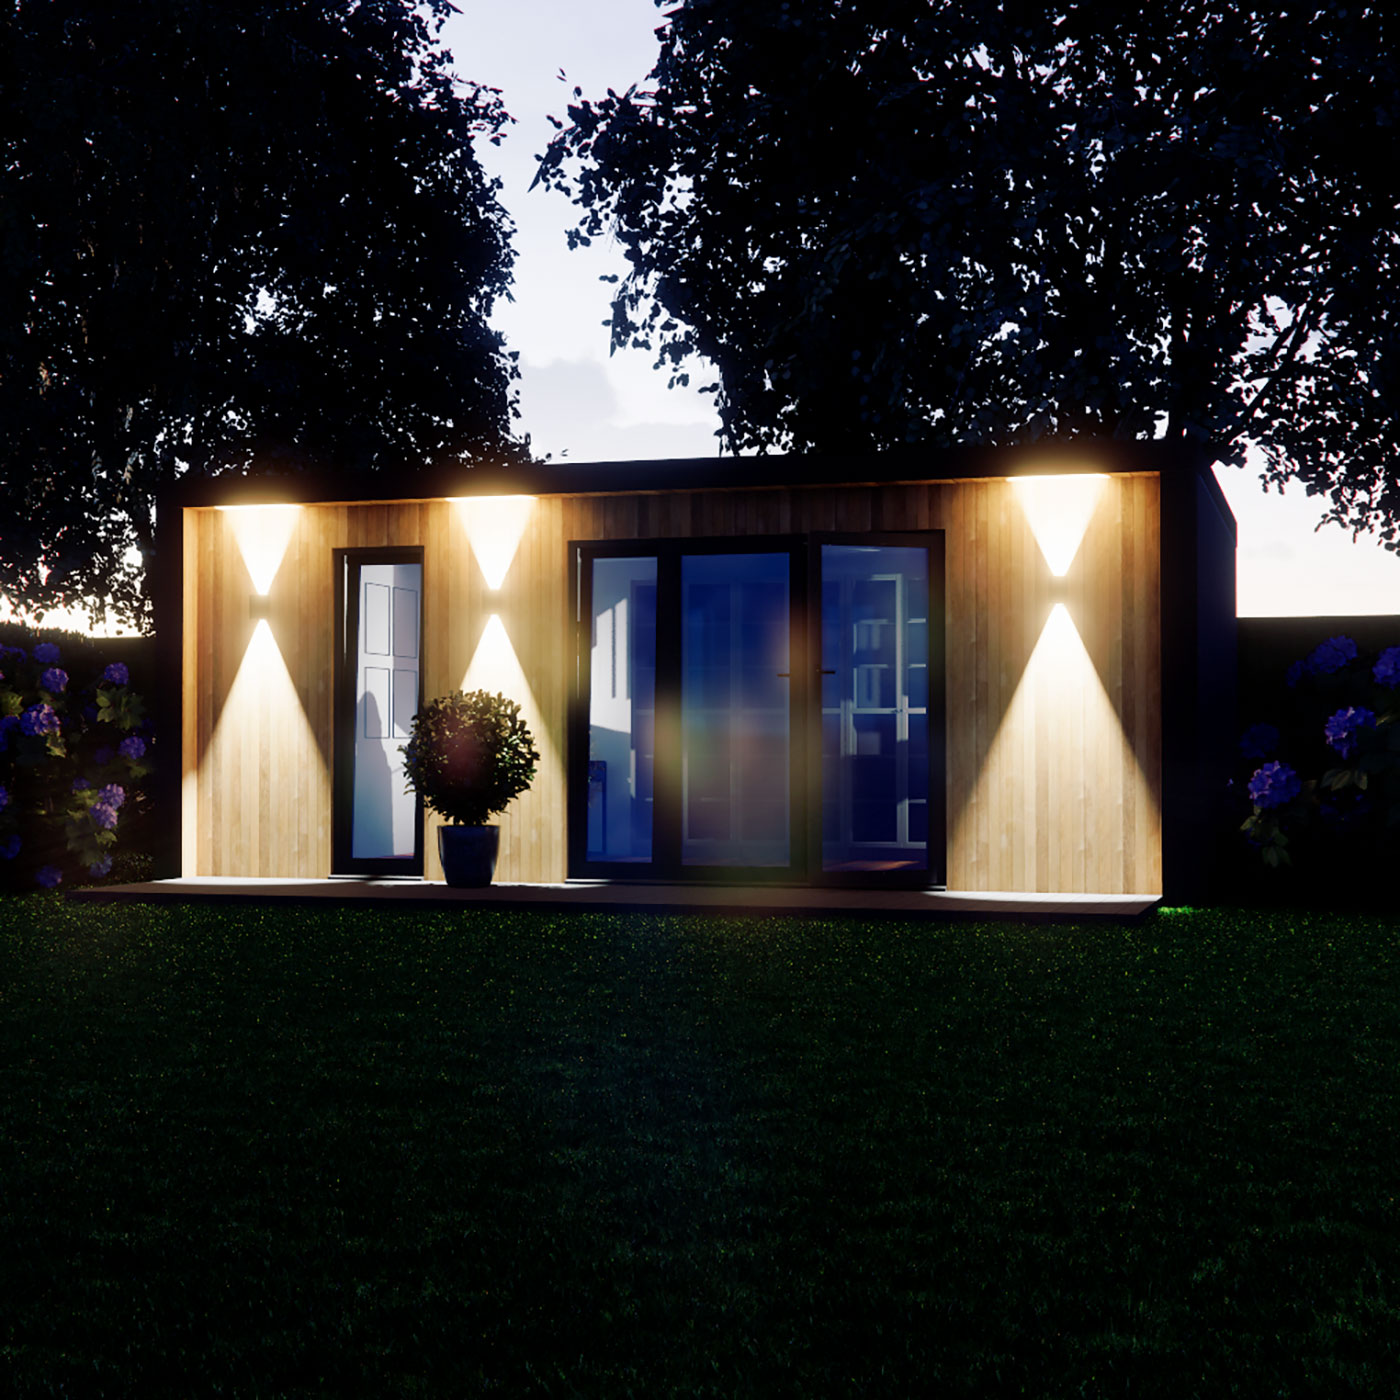 Night time visualisation of 3.9m by 6.2m garden room design